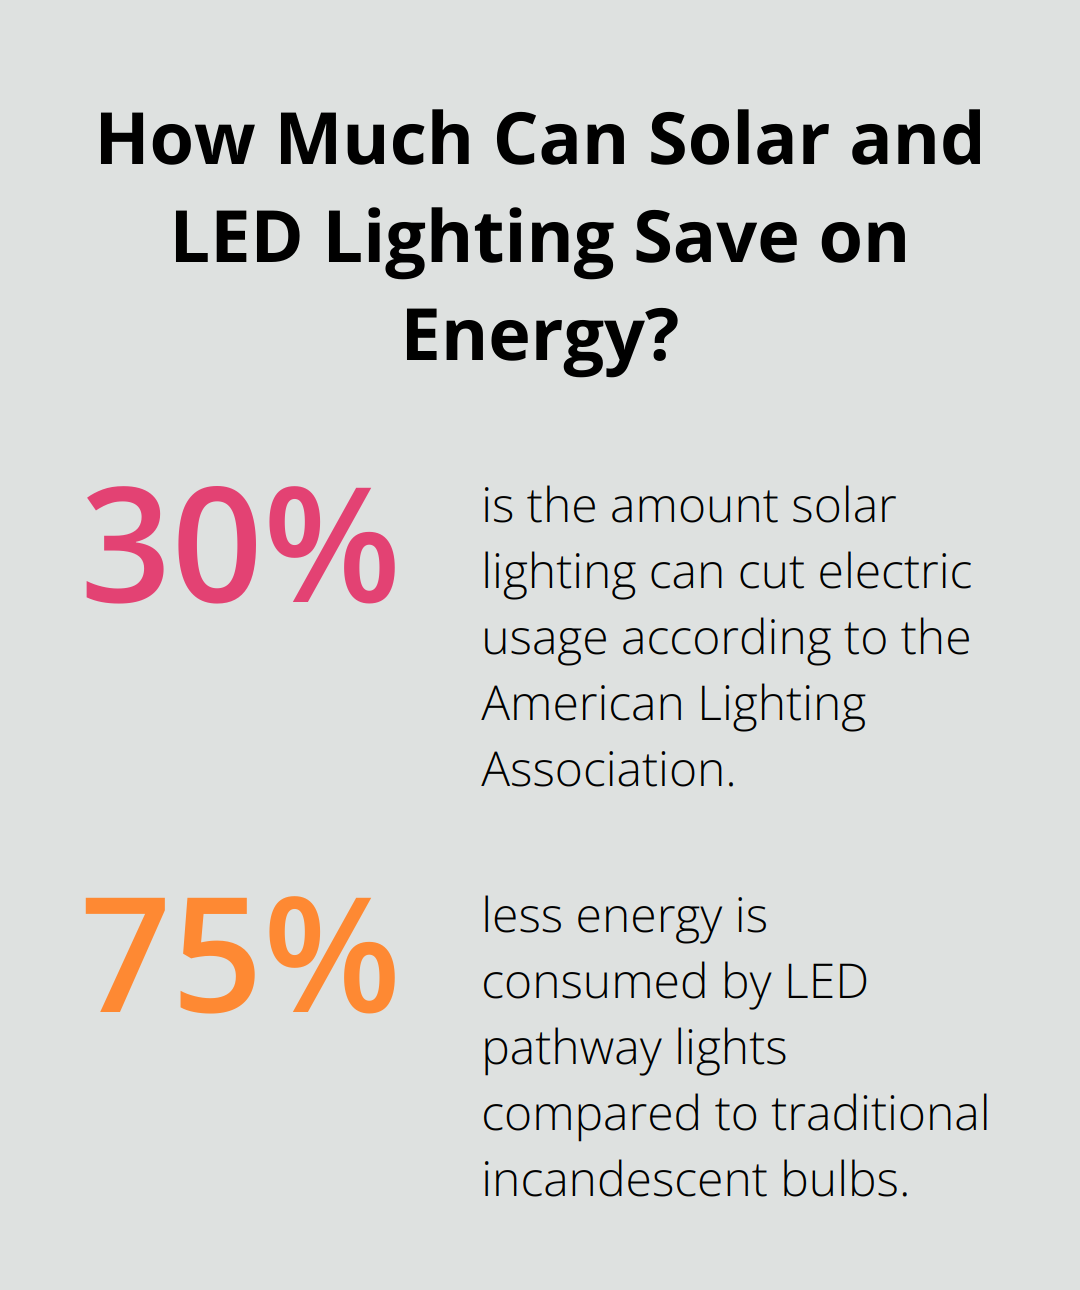 Fact - How Much Can Solar and LED Lighting Save on Energy?